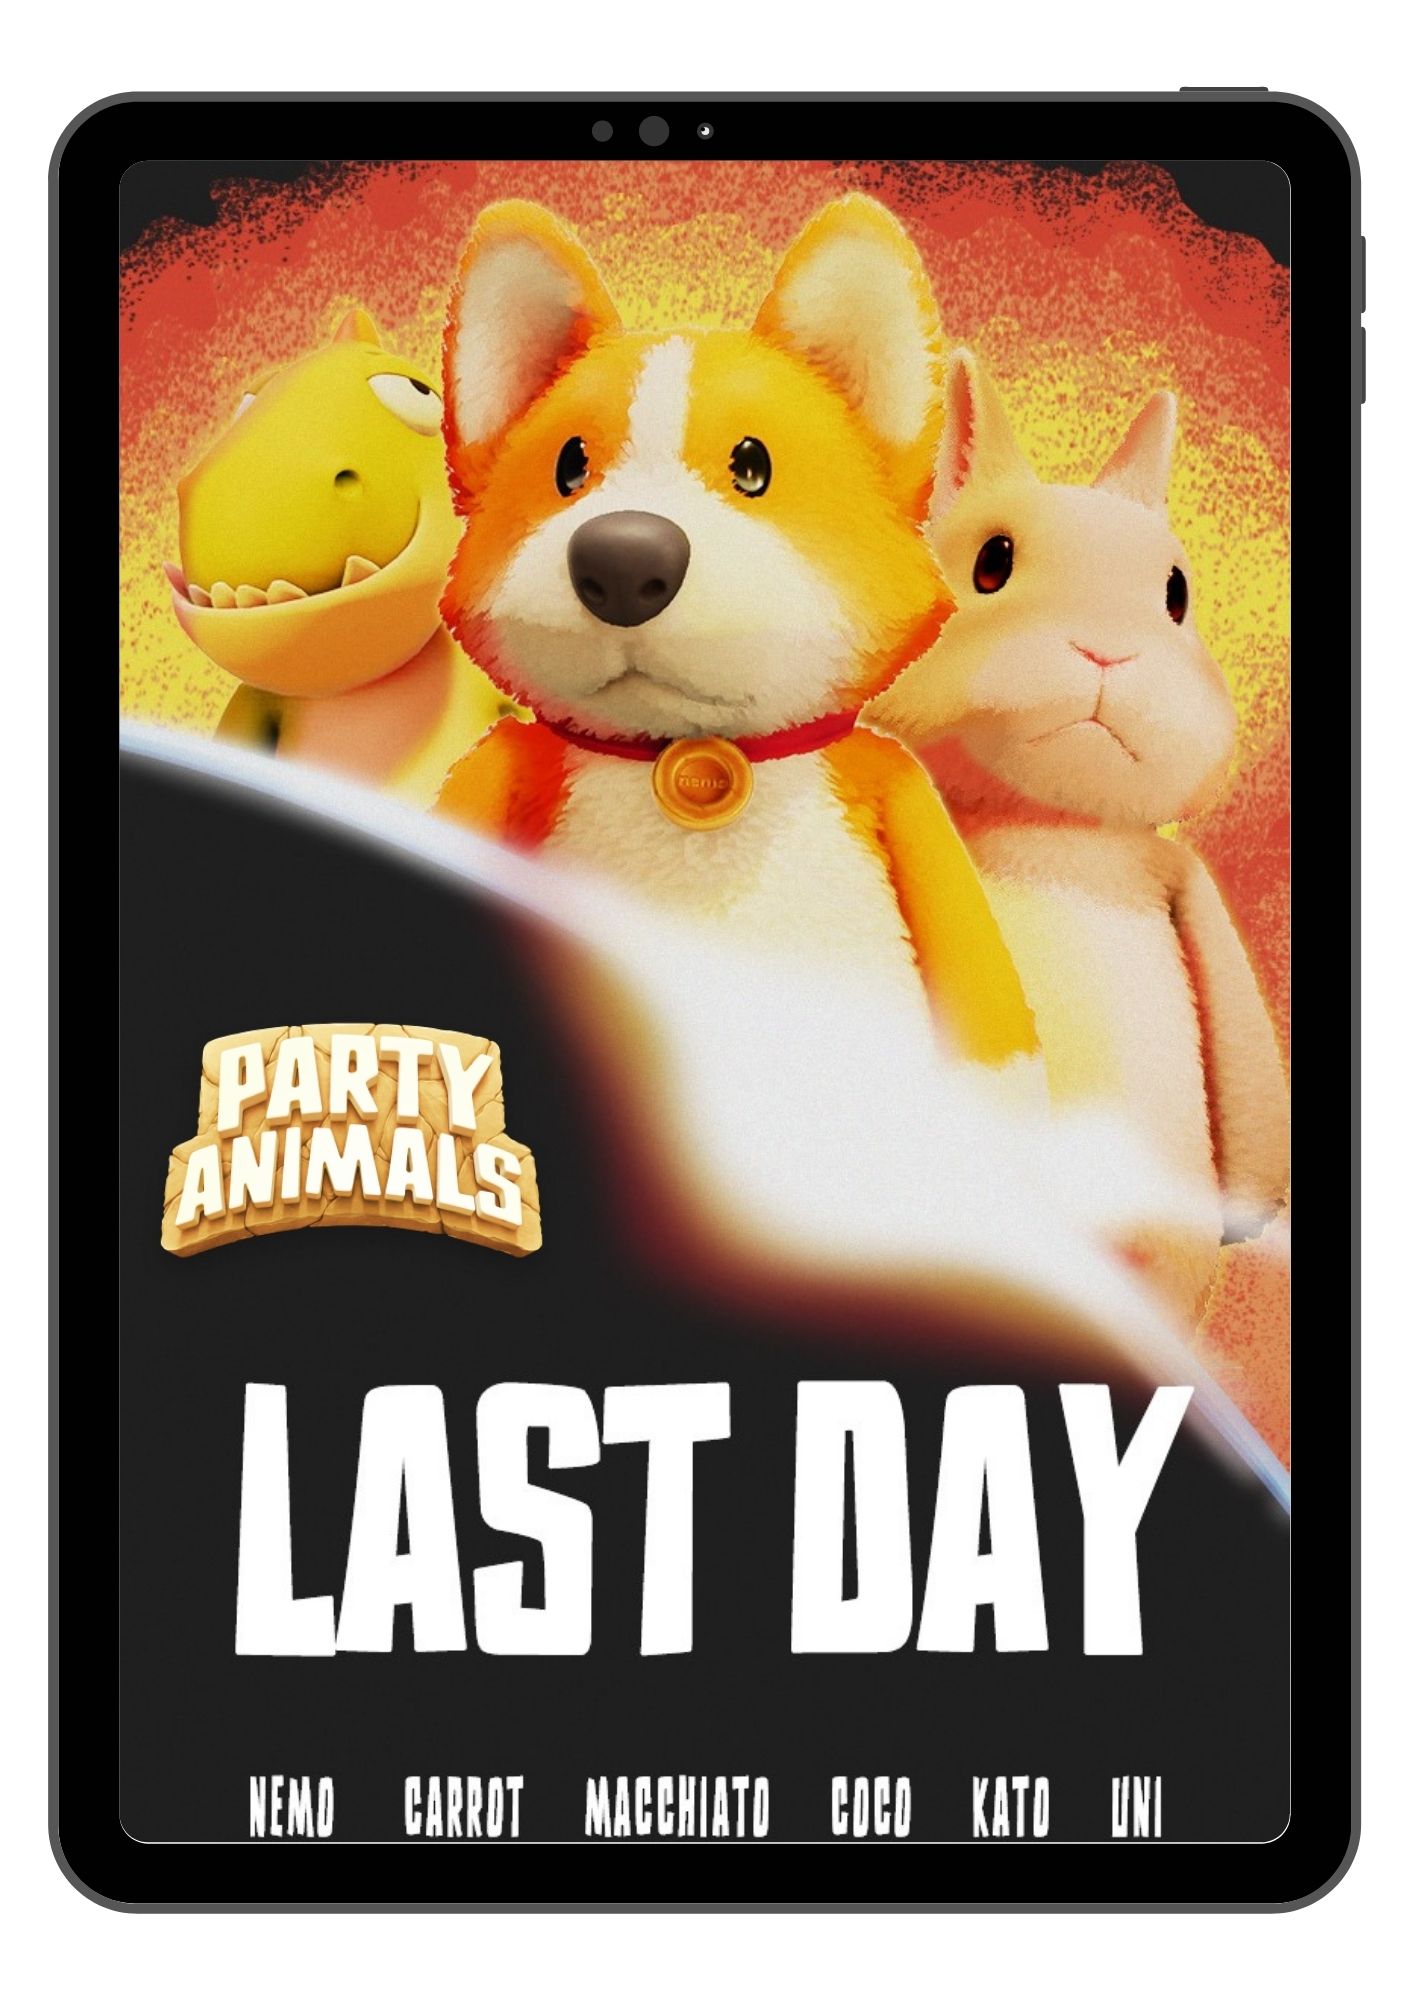 Download Party Animals on Android iOS | Game Search Engine